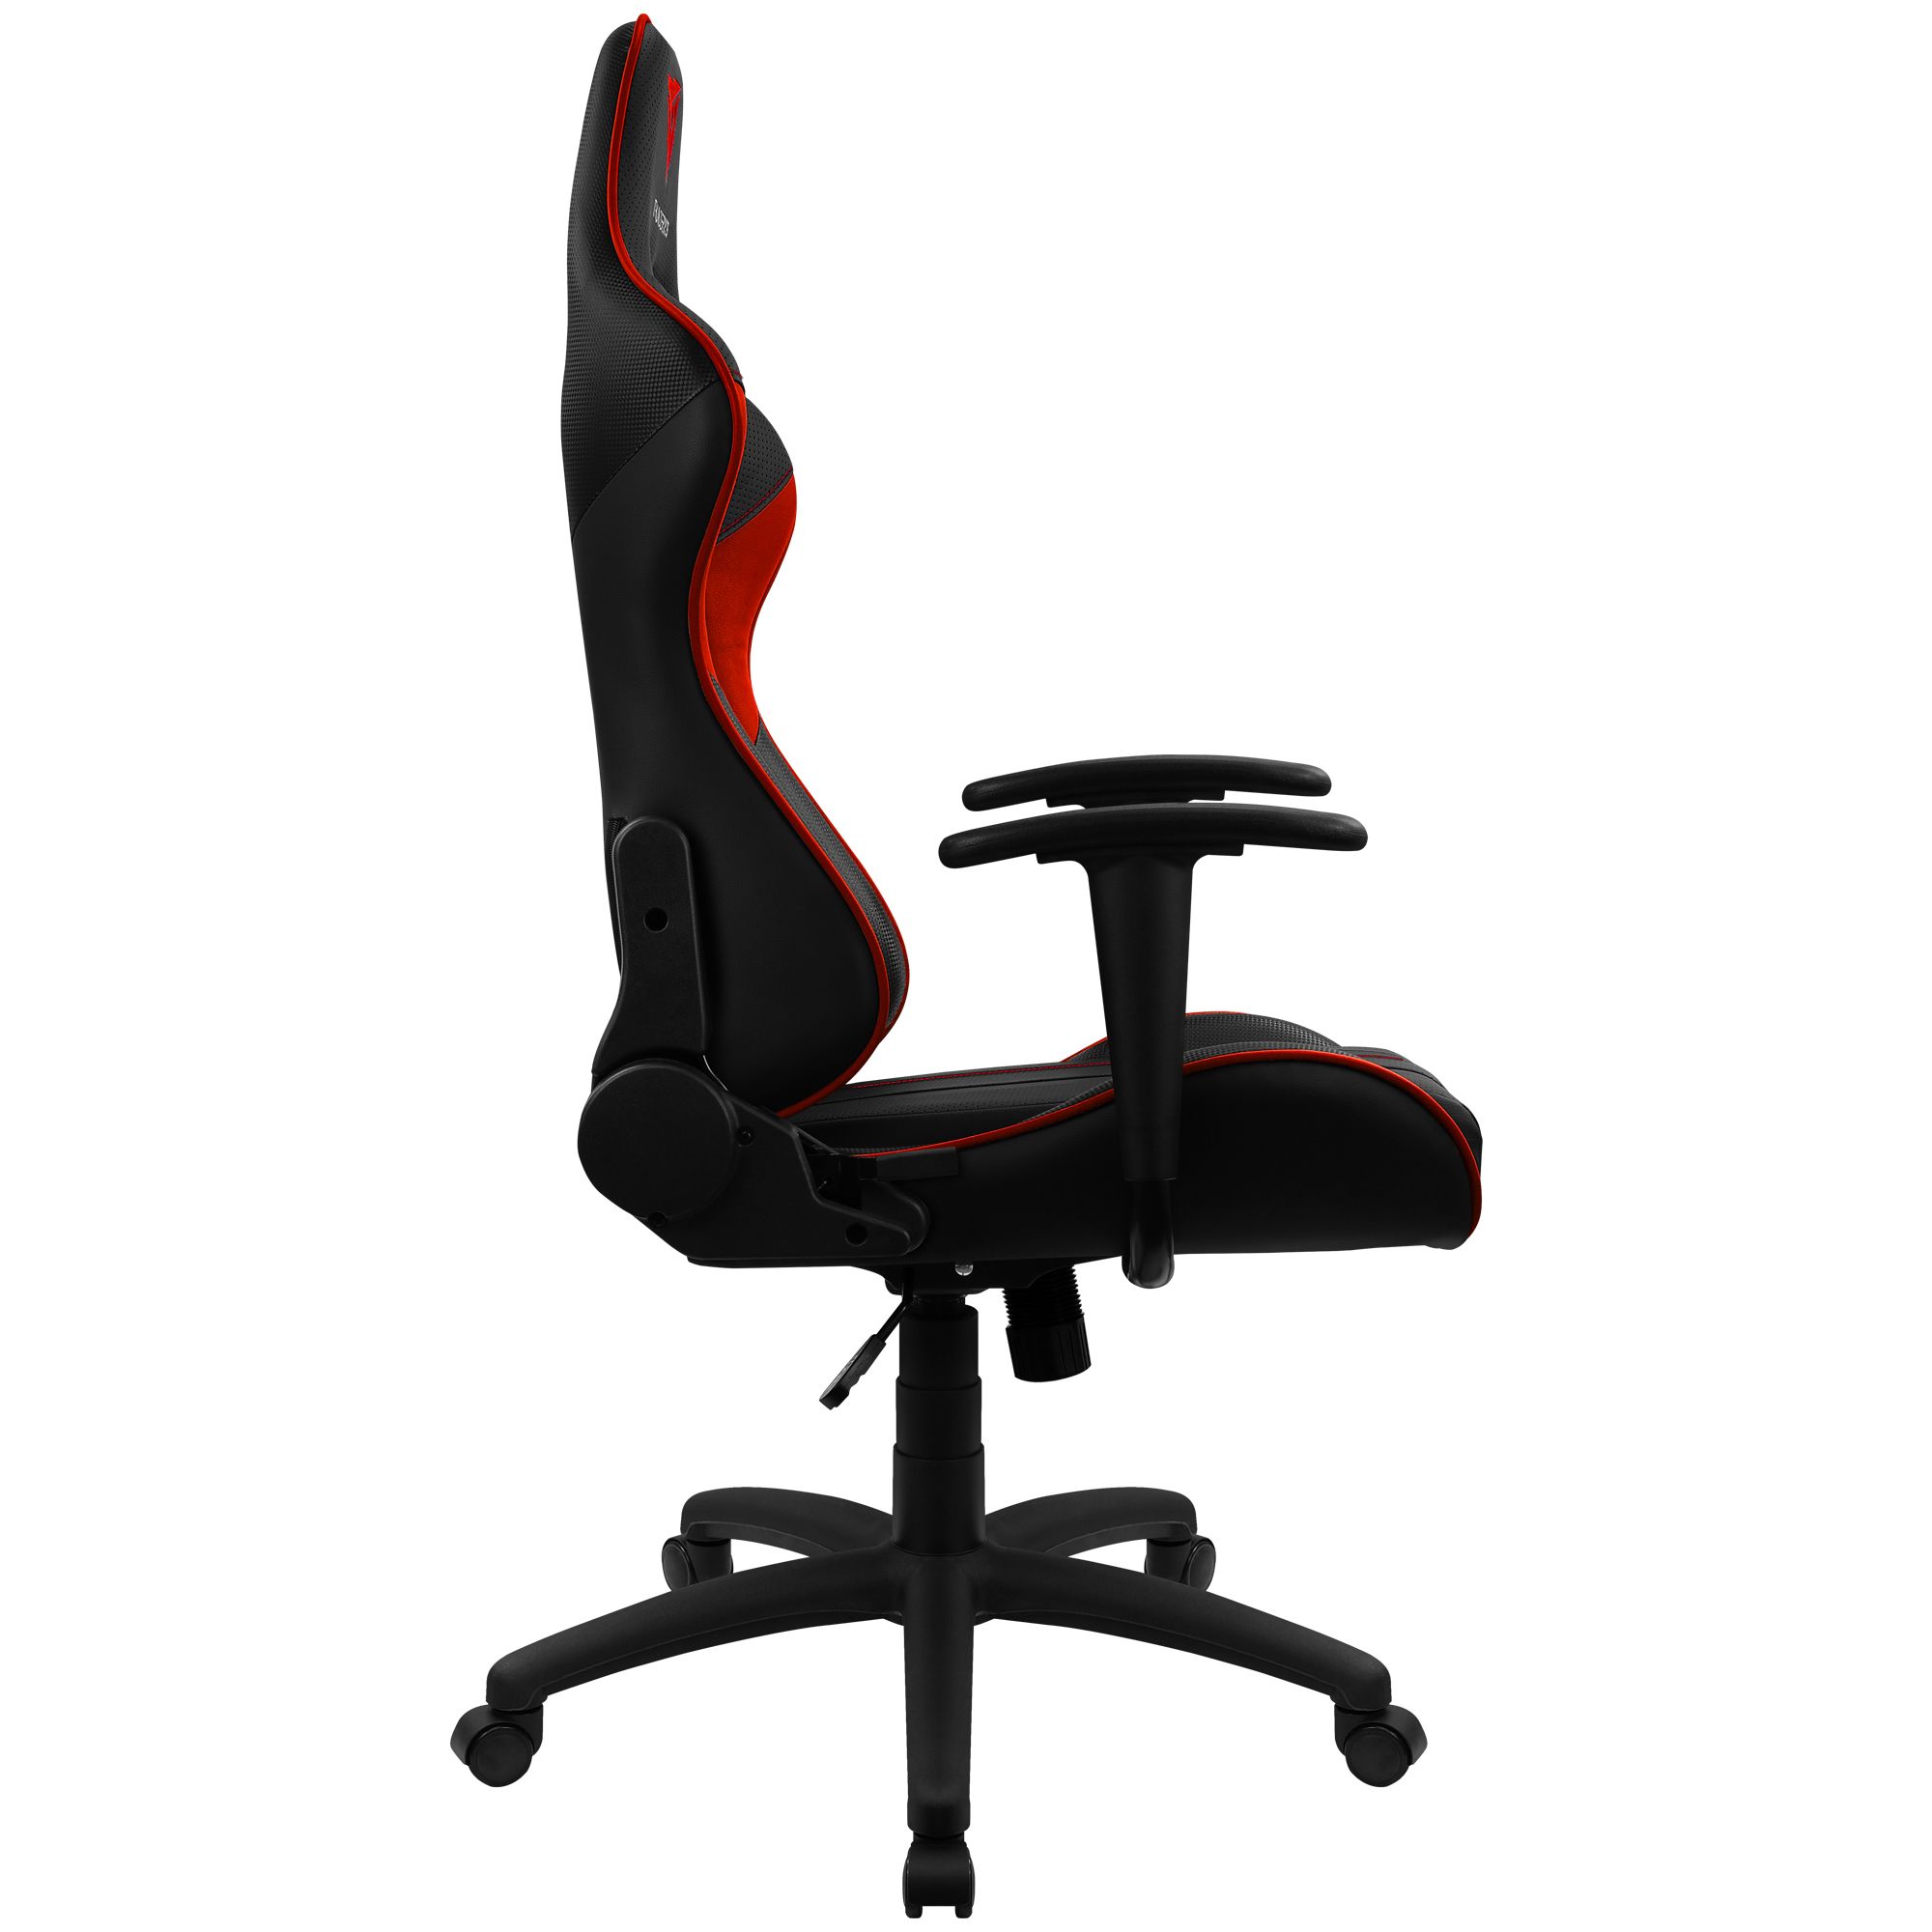 ThunderX3 EC3BR video game chair PC gaming chair Padded seat Black, Red_3